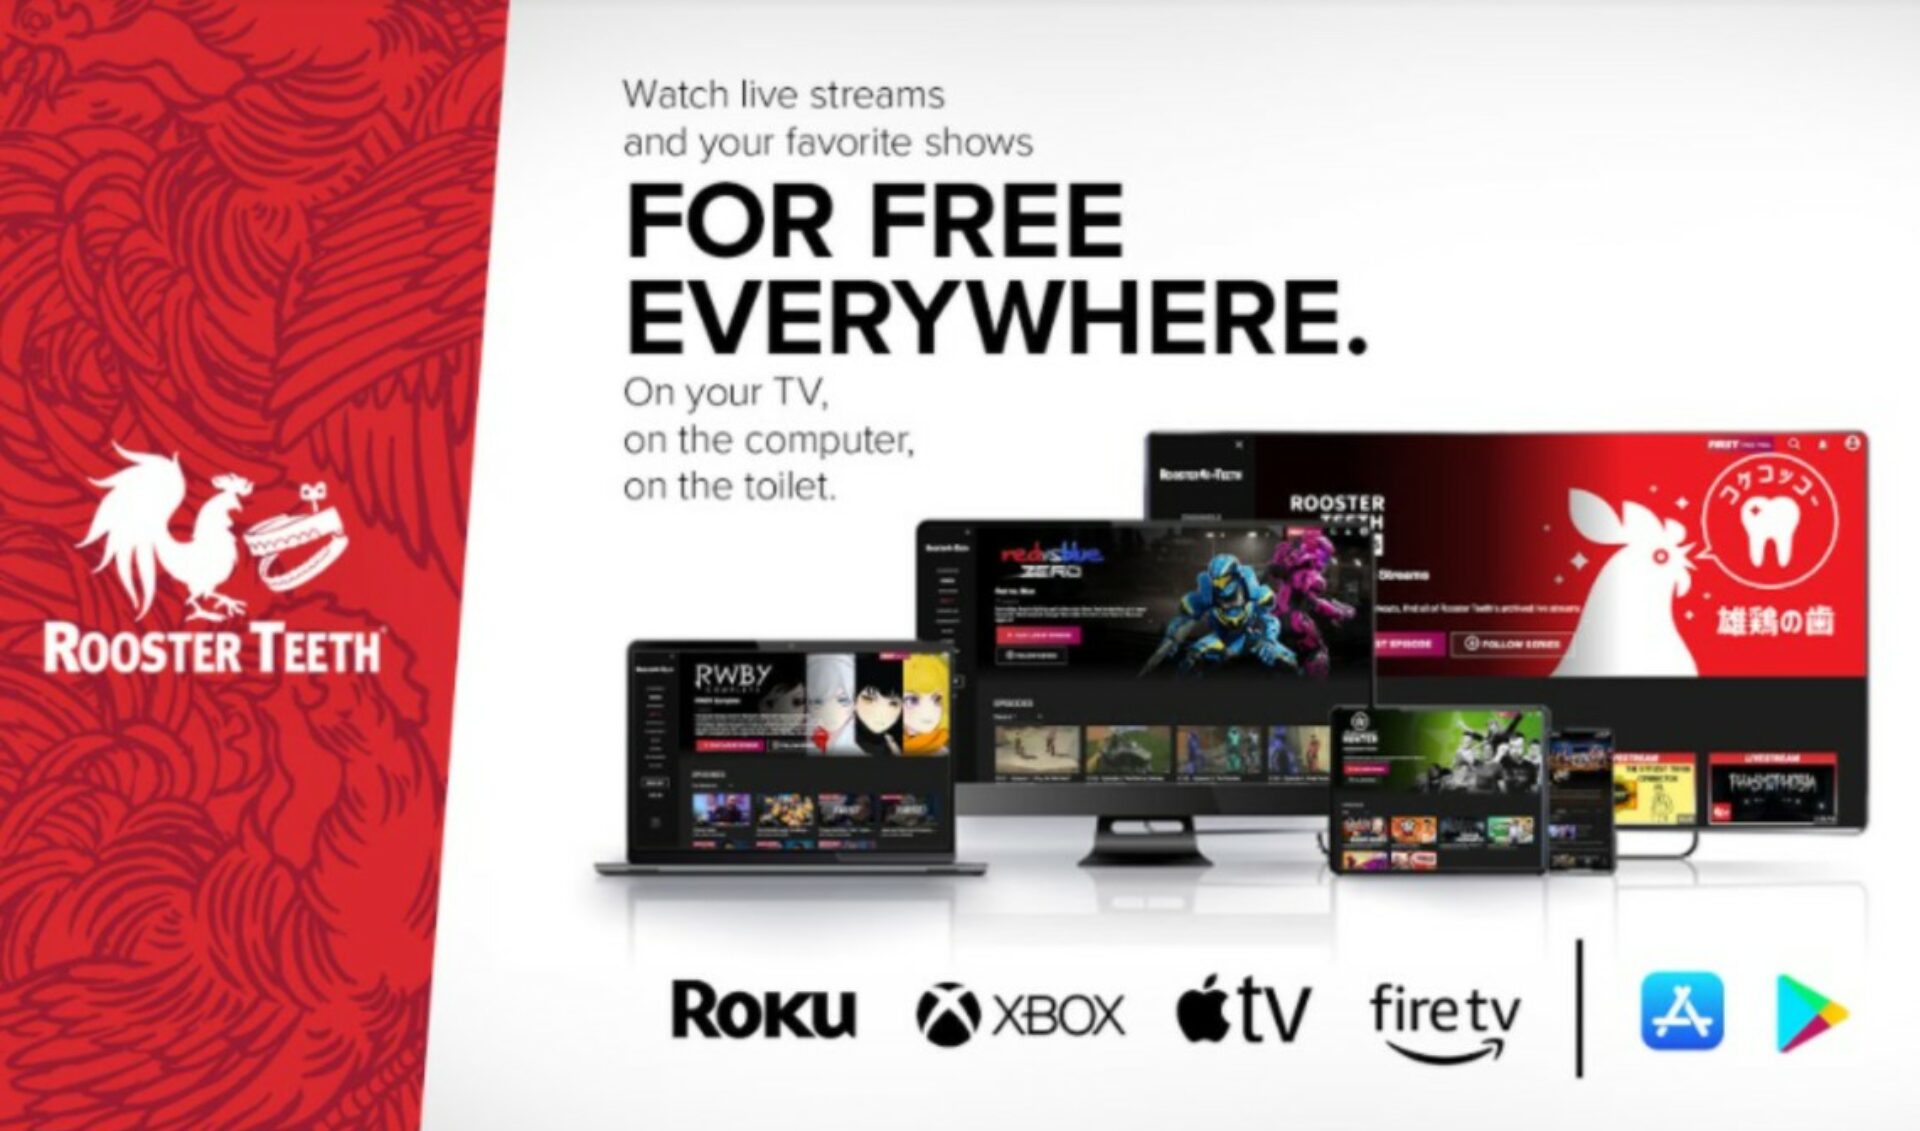 Rooster Teeth Launches New Smart TV Apps, As It Pulls Flagship ‘RWBY’ Series From YouTube